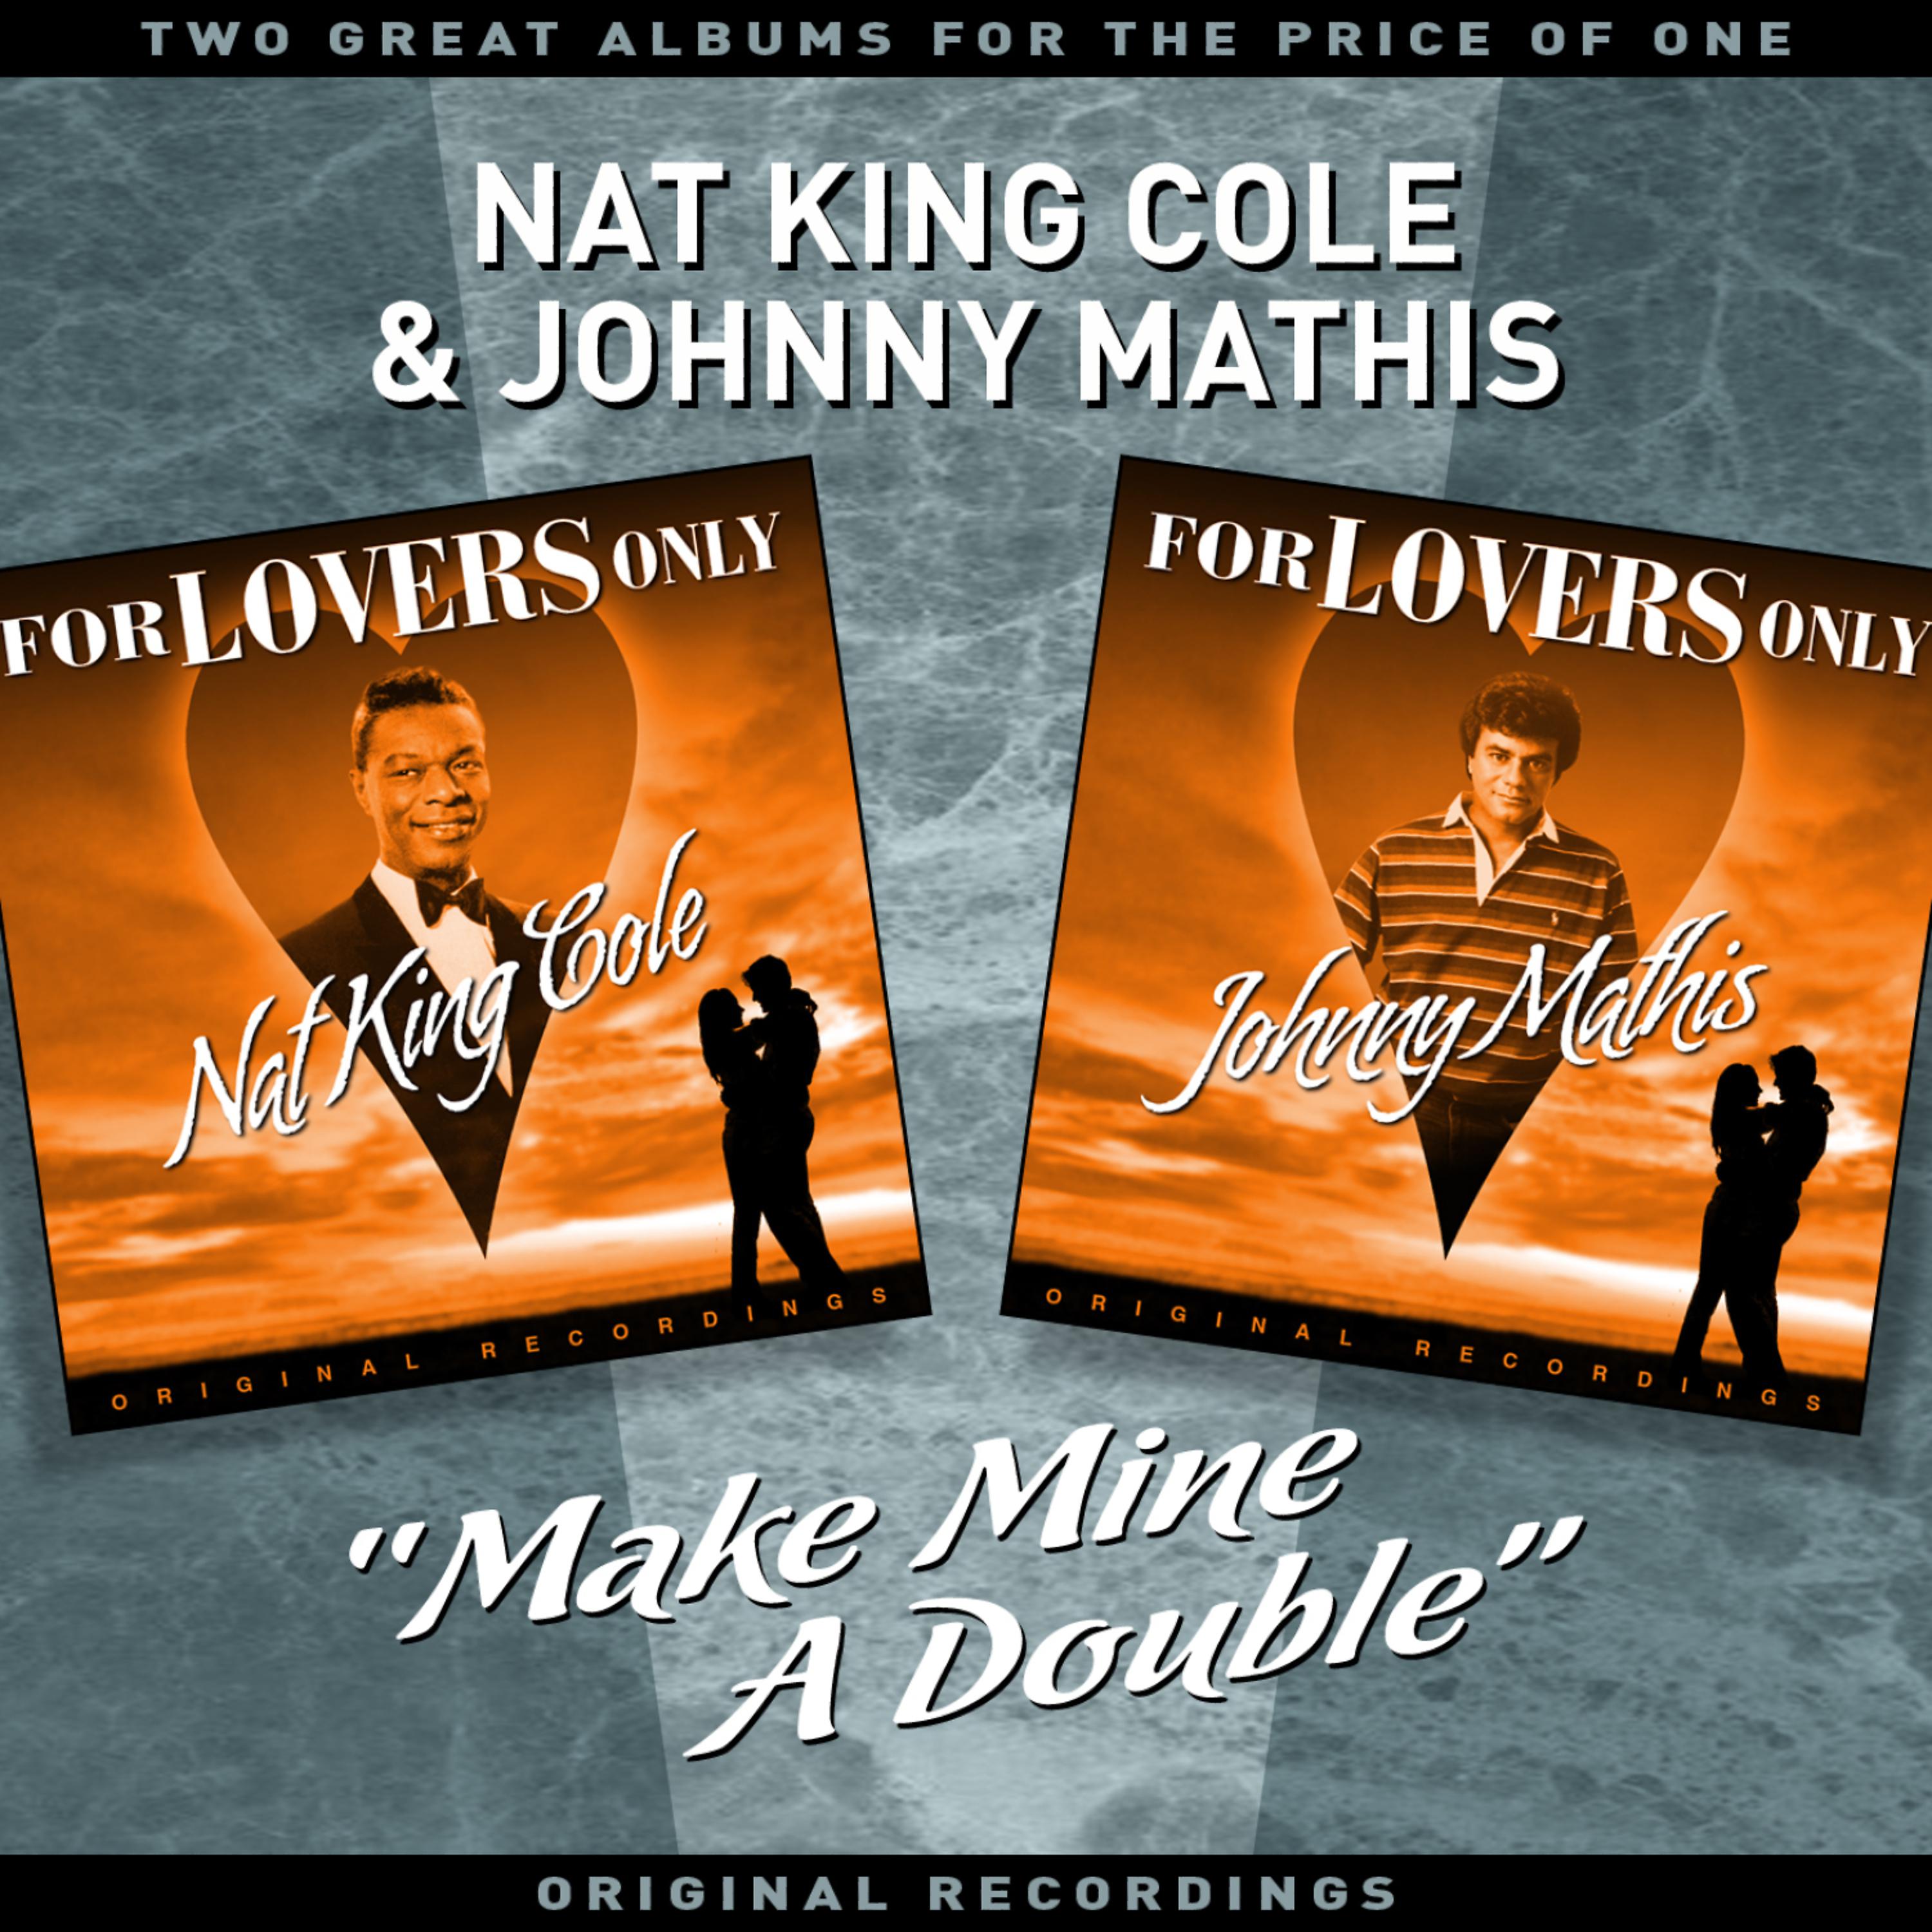 Постер альбома "Make Mine A Double" Vol' 1 - Two Great Albums For The Price Of One